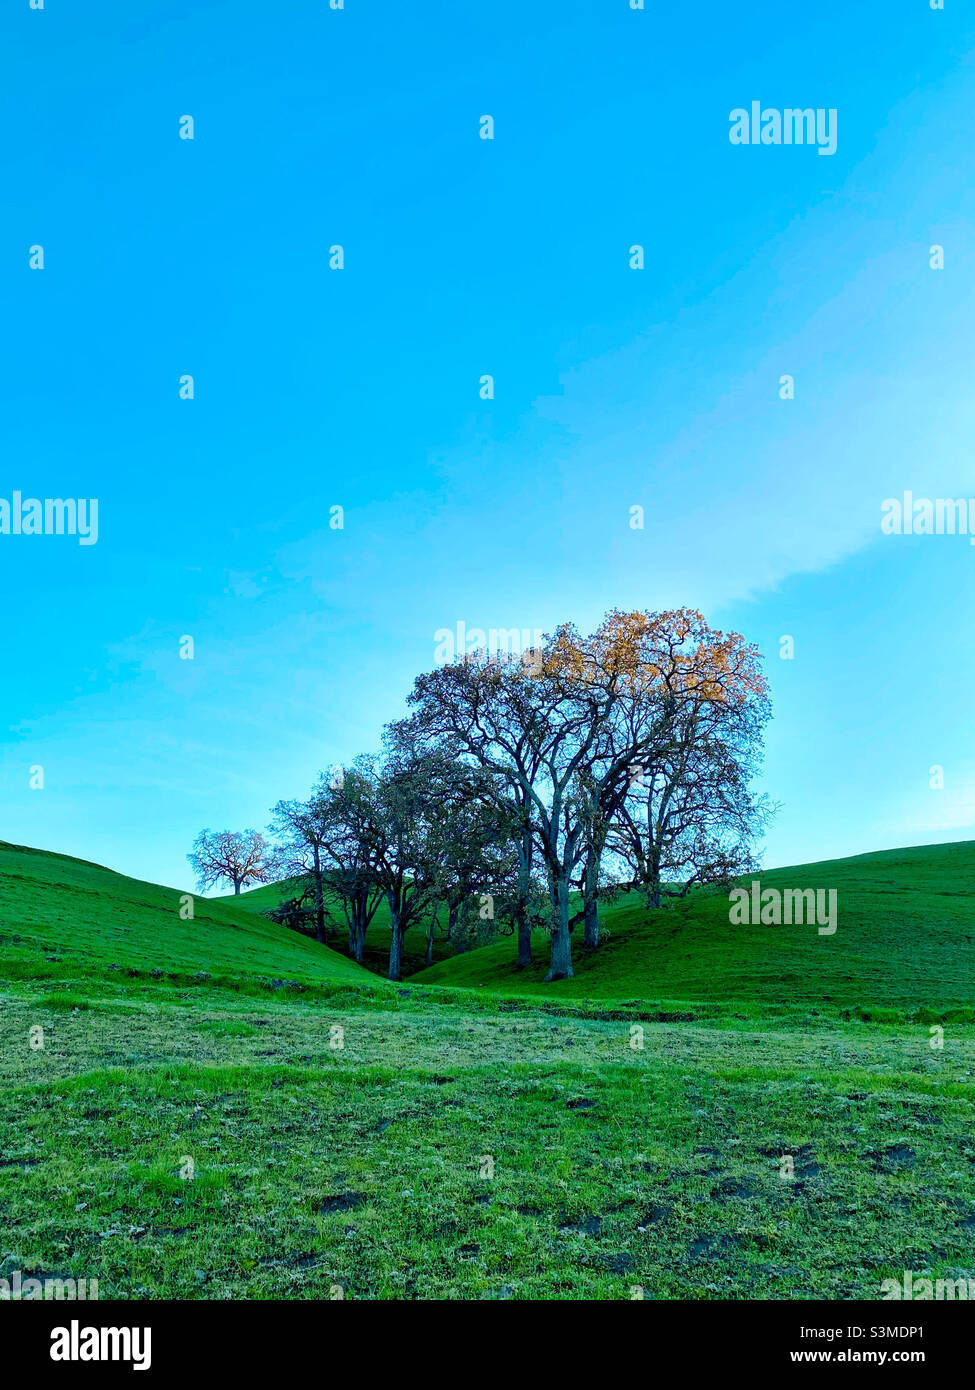 Winter oaks in green pasture with blue sky Stock Photo